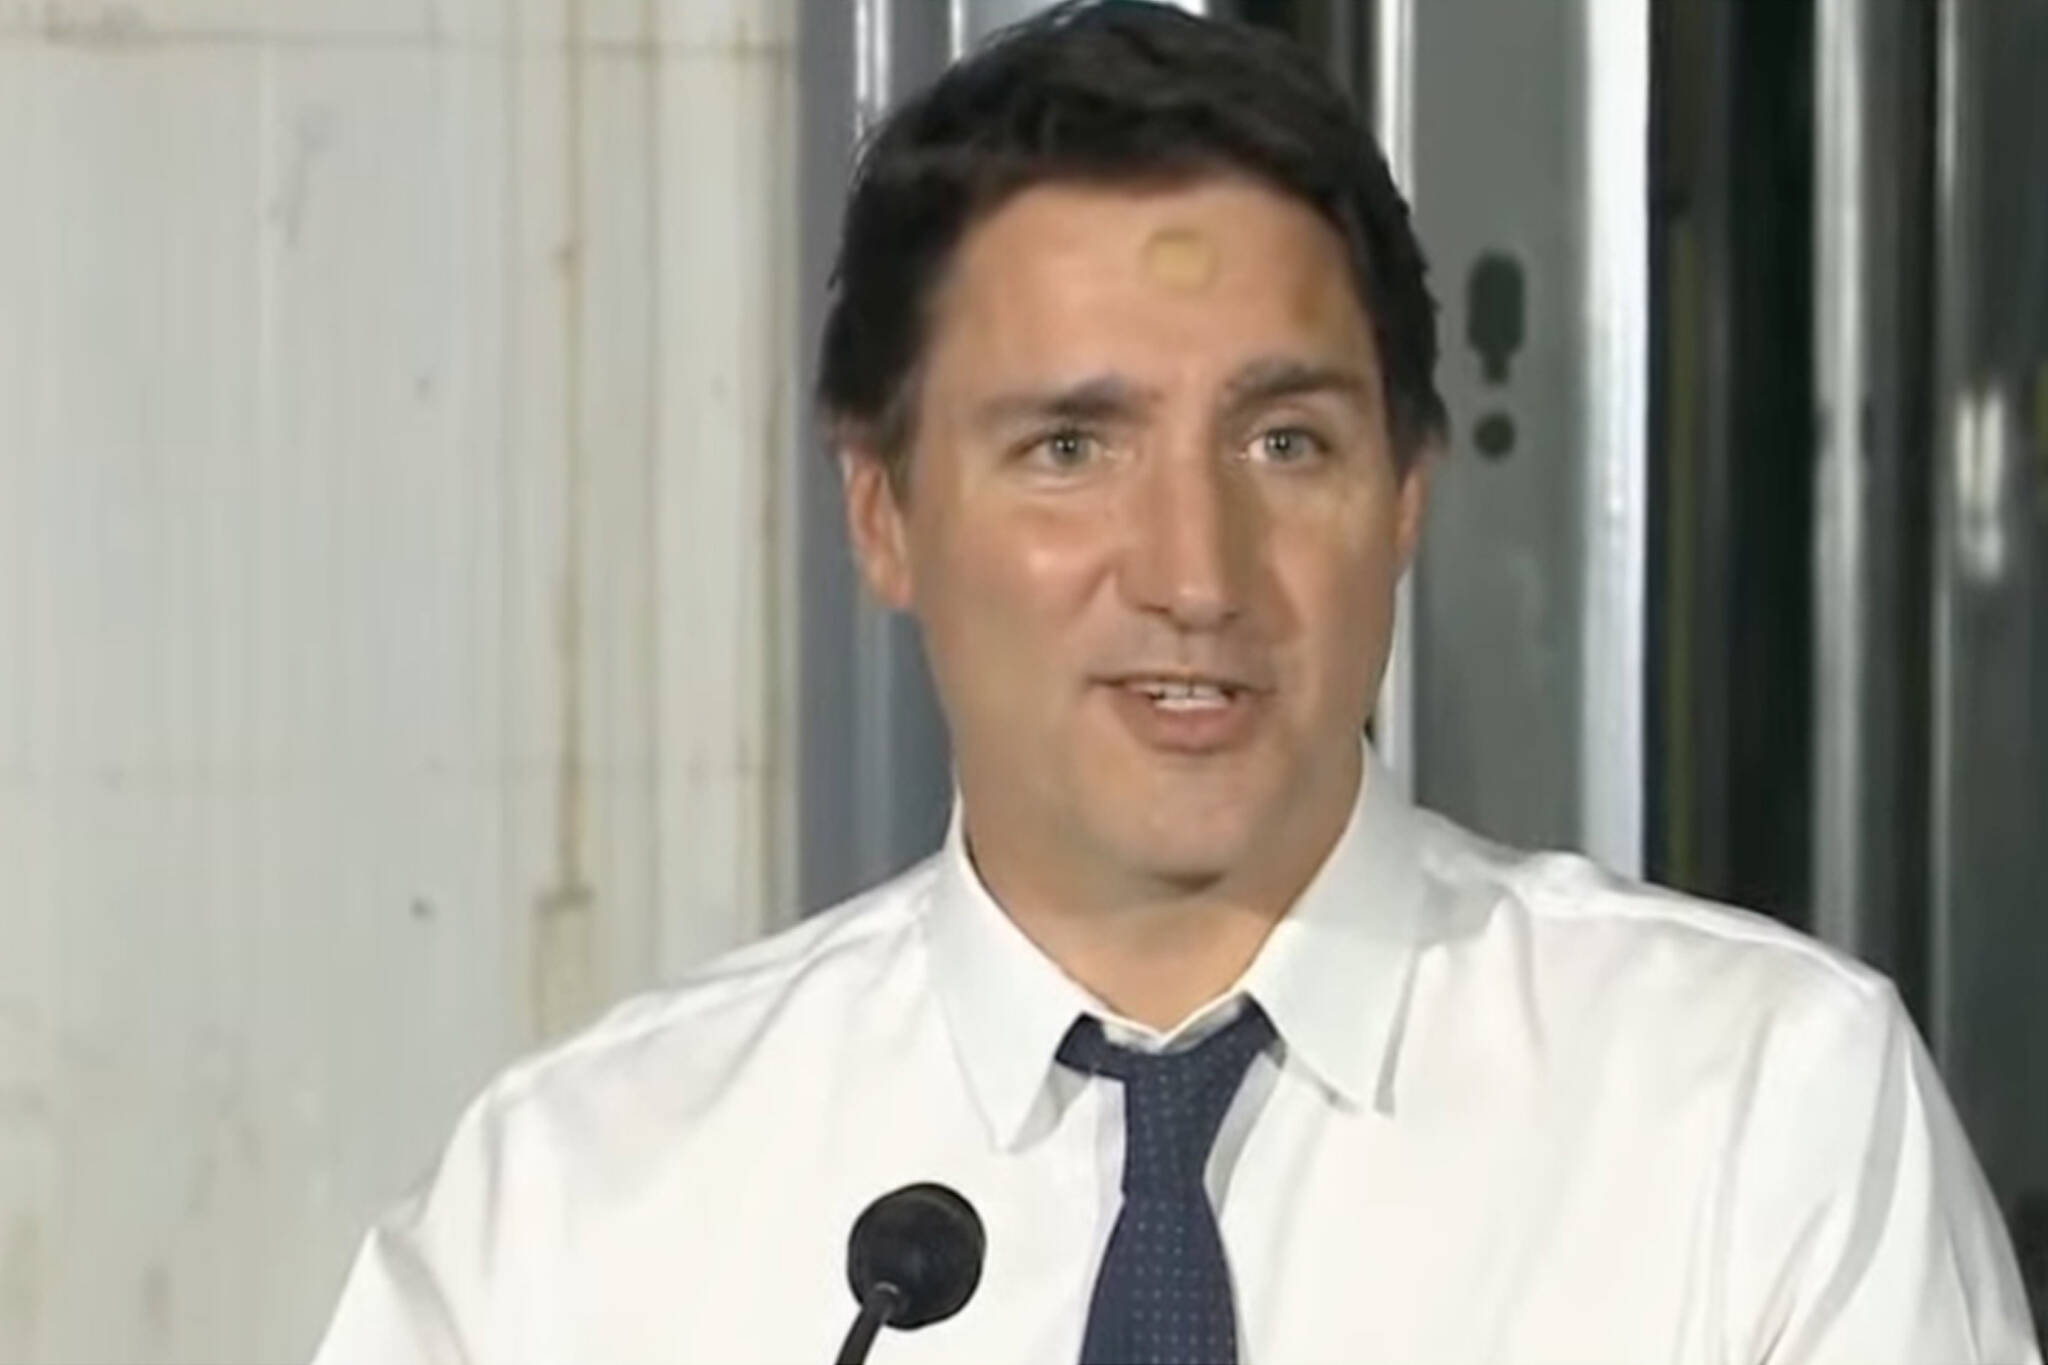 Canadians wonder what happened to Justin Trudeau's forehead